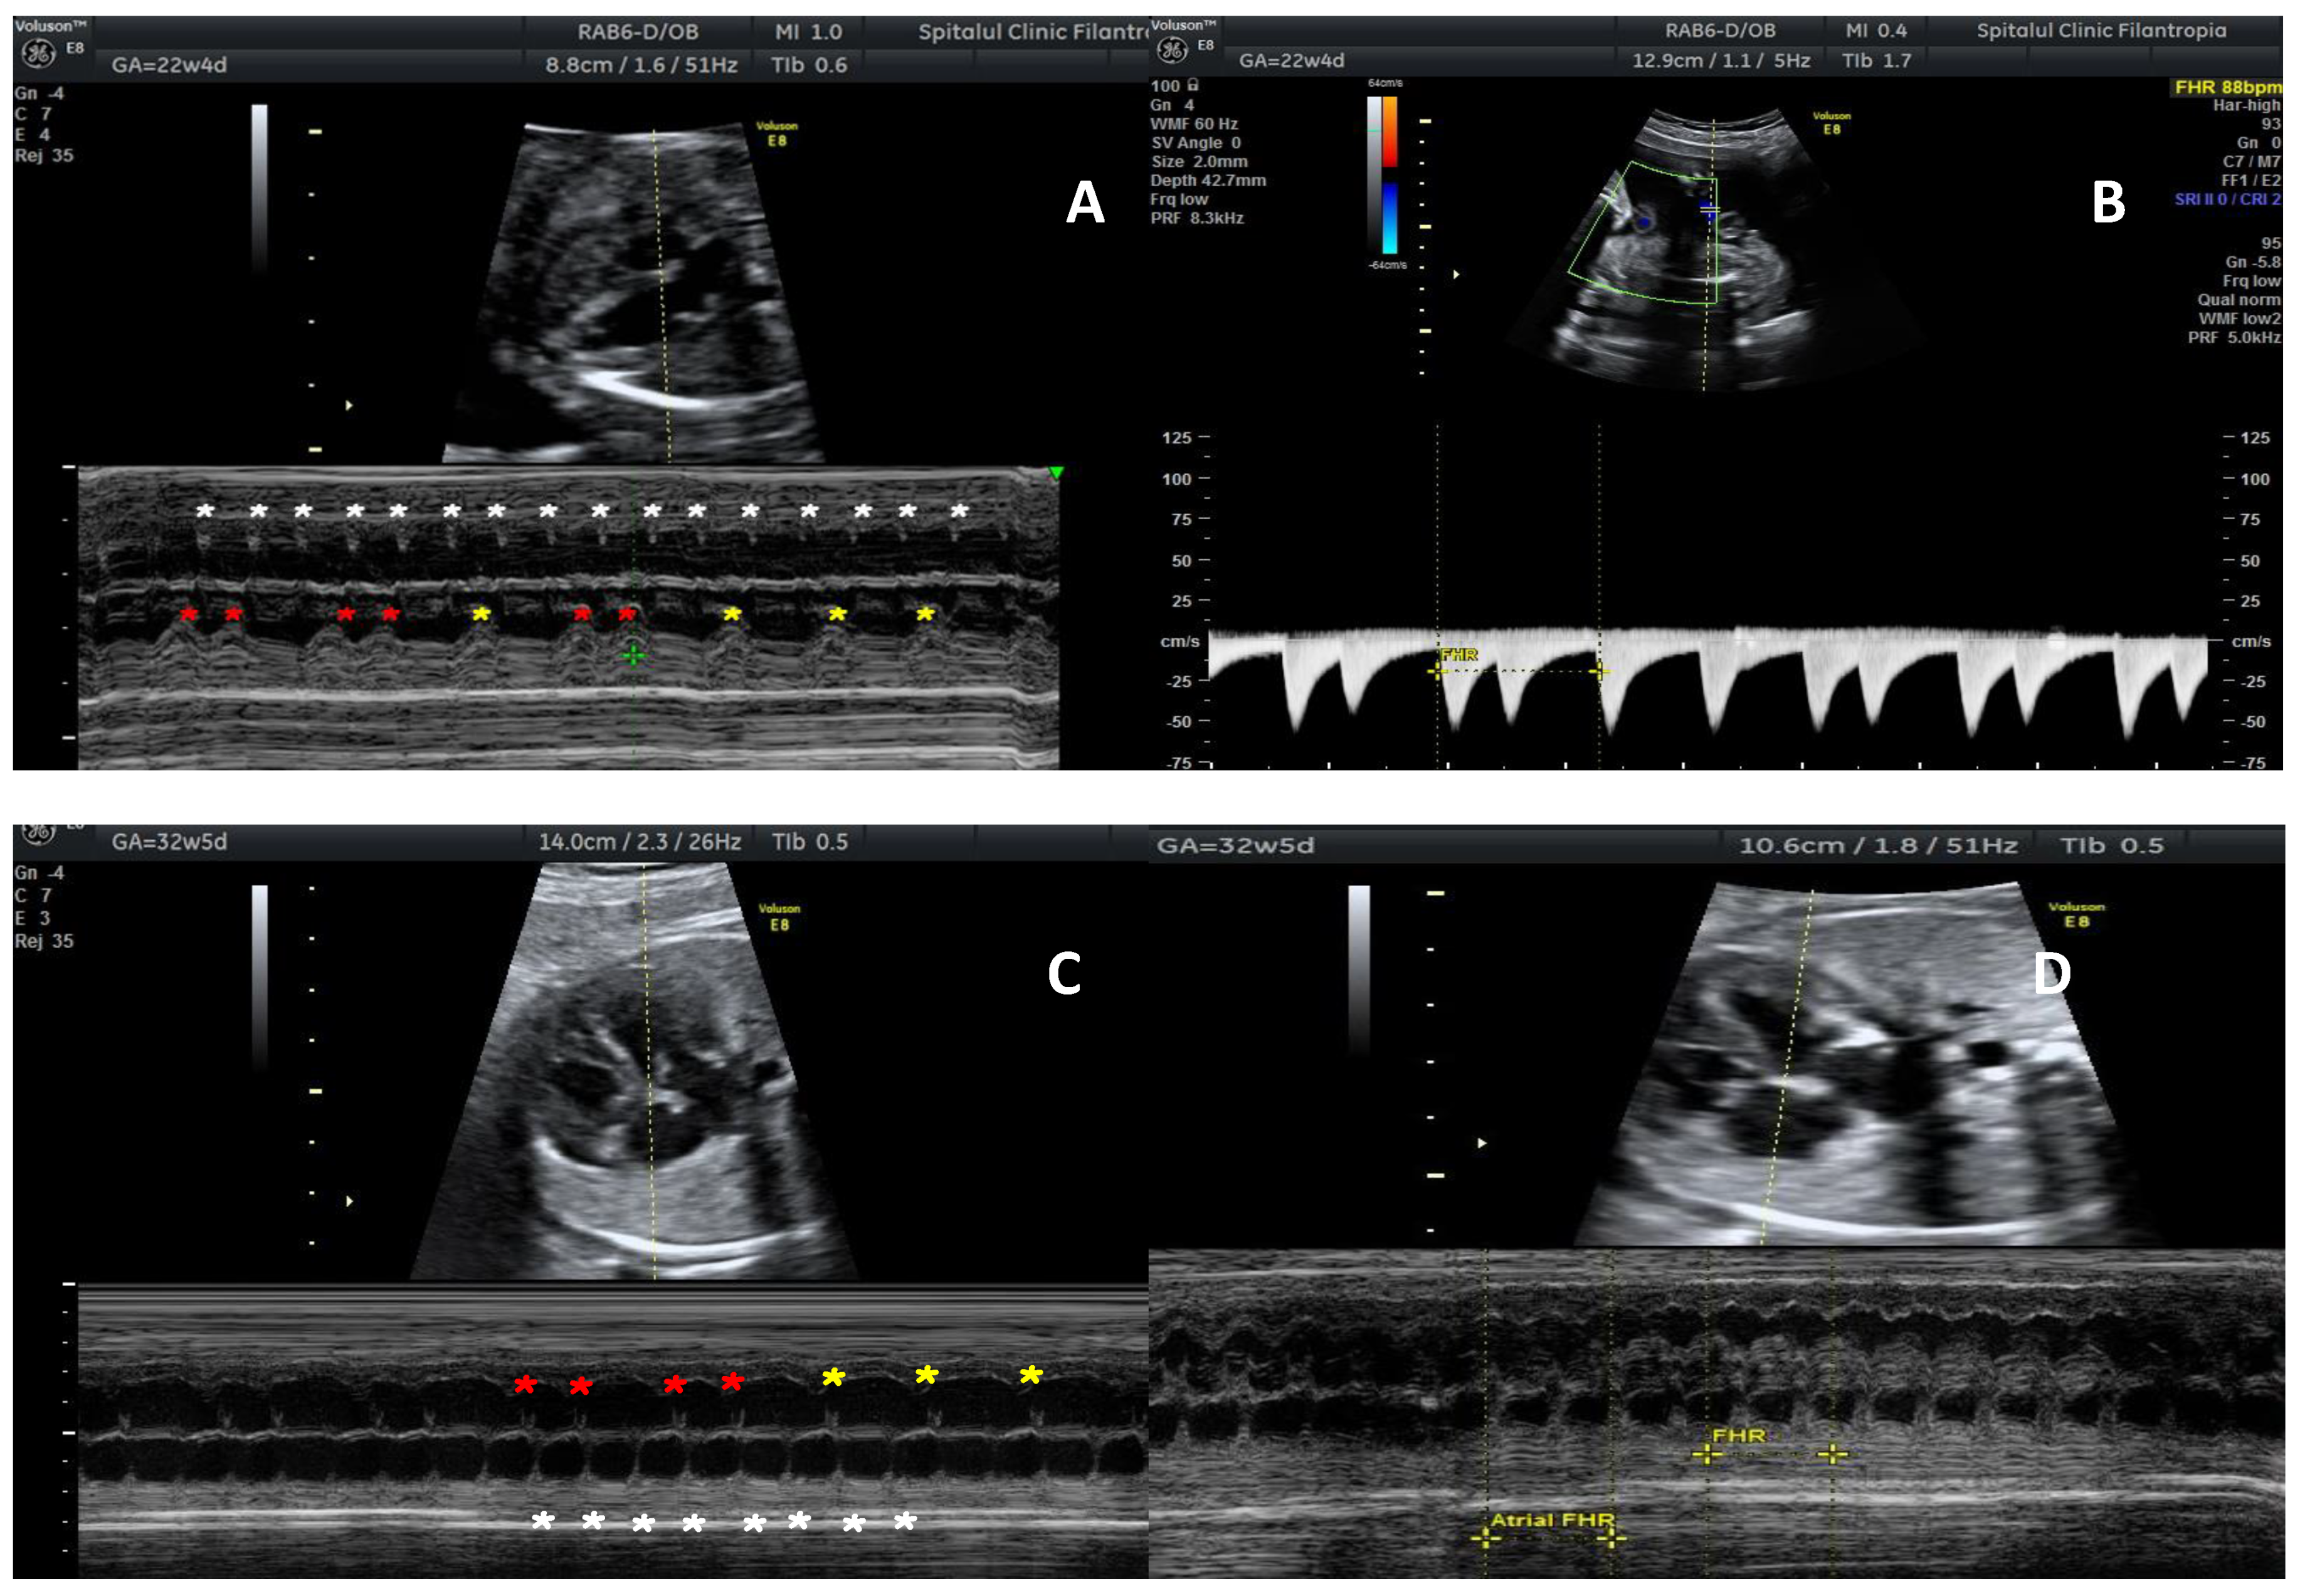 Incidence and predictors of developing high-degree AV block in patients